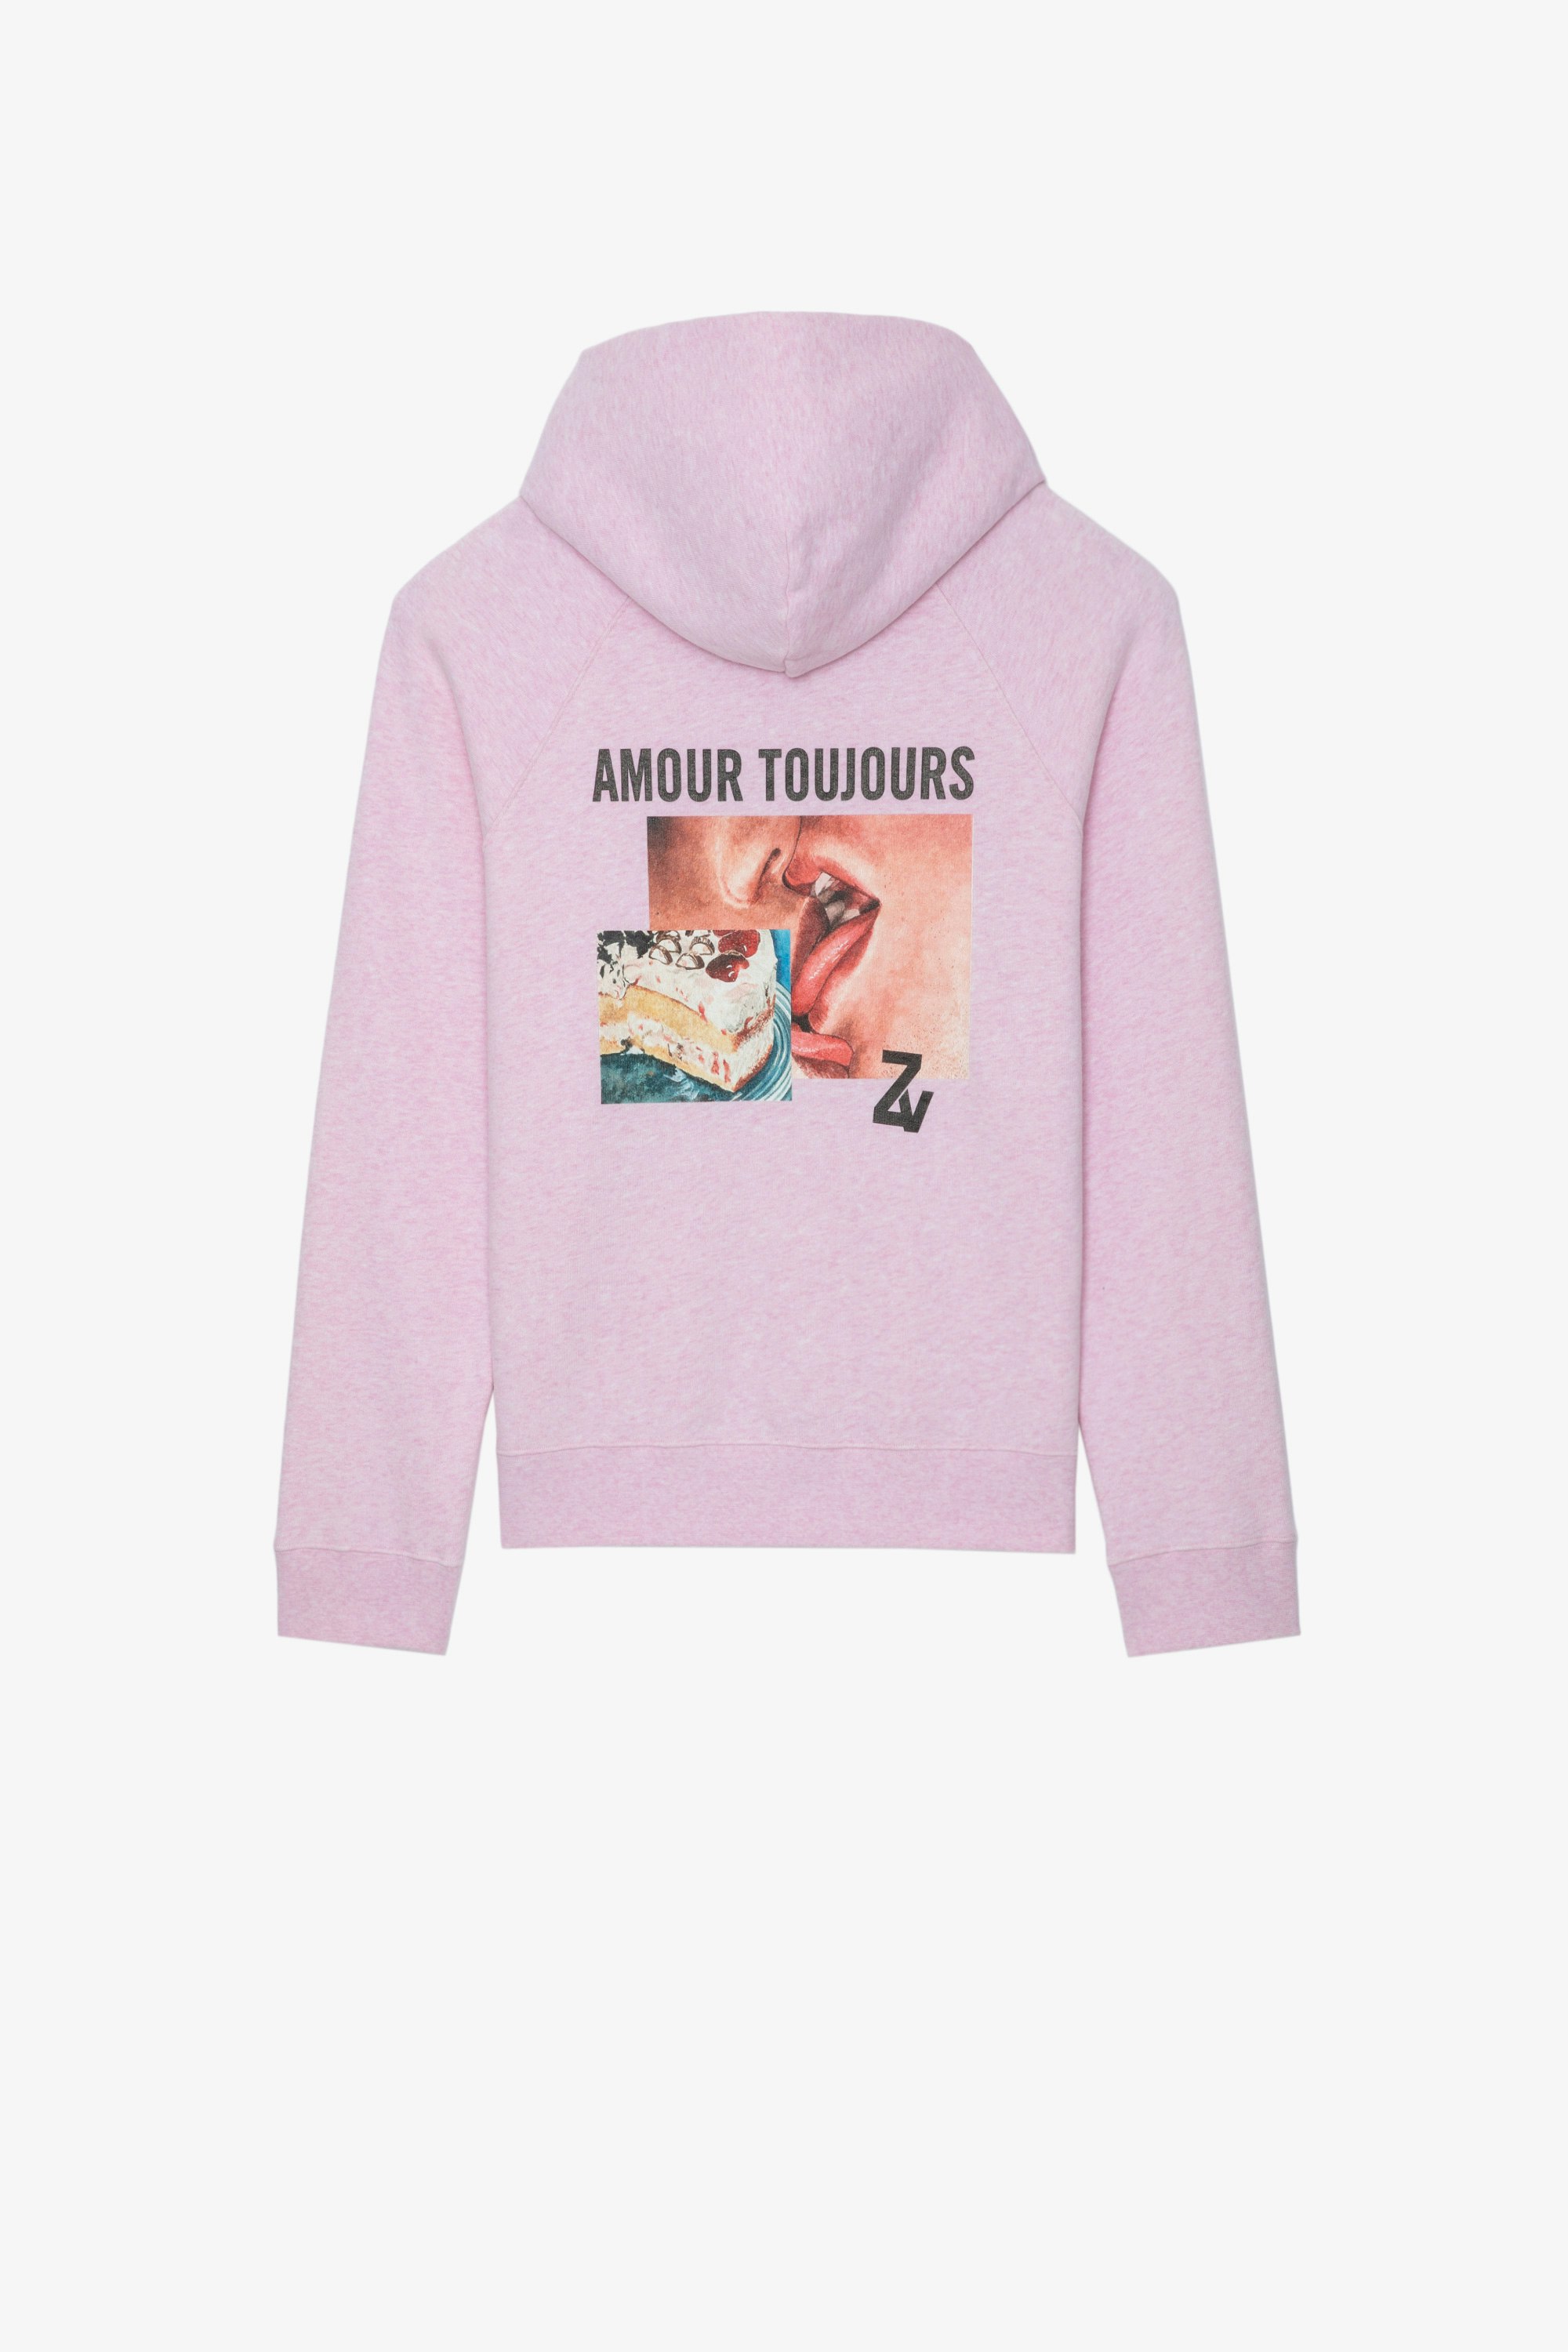 Georgy Photoprint Sweatshirt Women’s hooded sweatshirt in pink cotton with a photoprint and the slogans “Art” and “Amour Toujours”